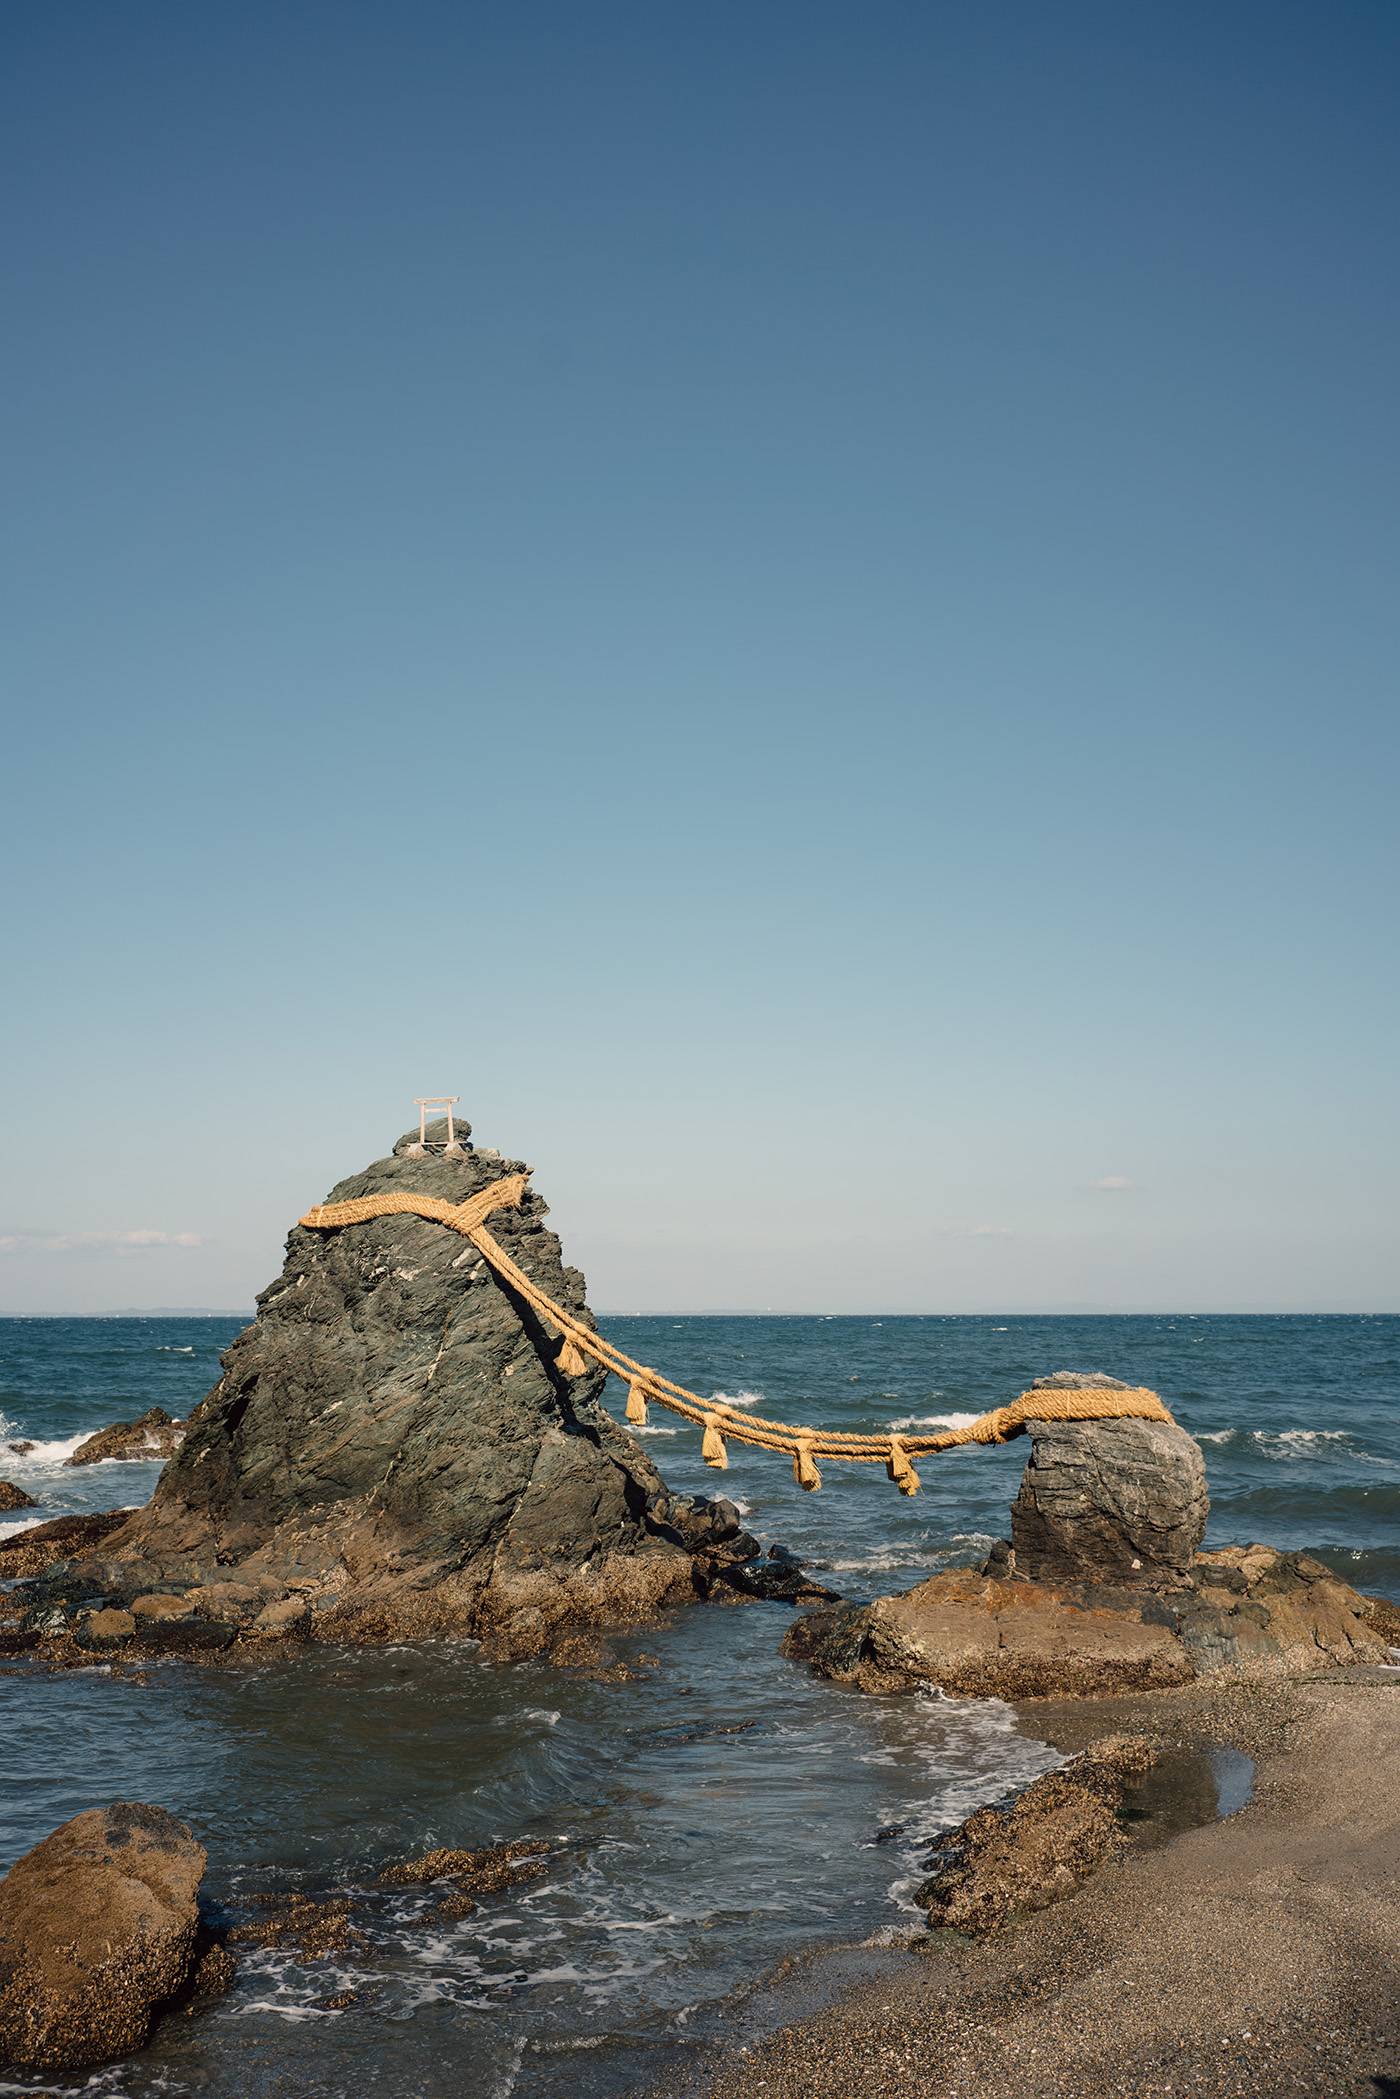 Scenic view of Wedded Rocks connected with shimenawa rope and located in sea under blue sky on sunny day in Japan